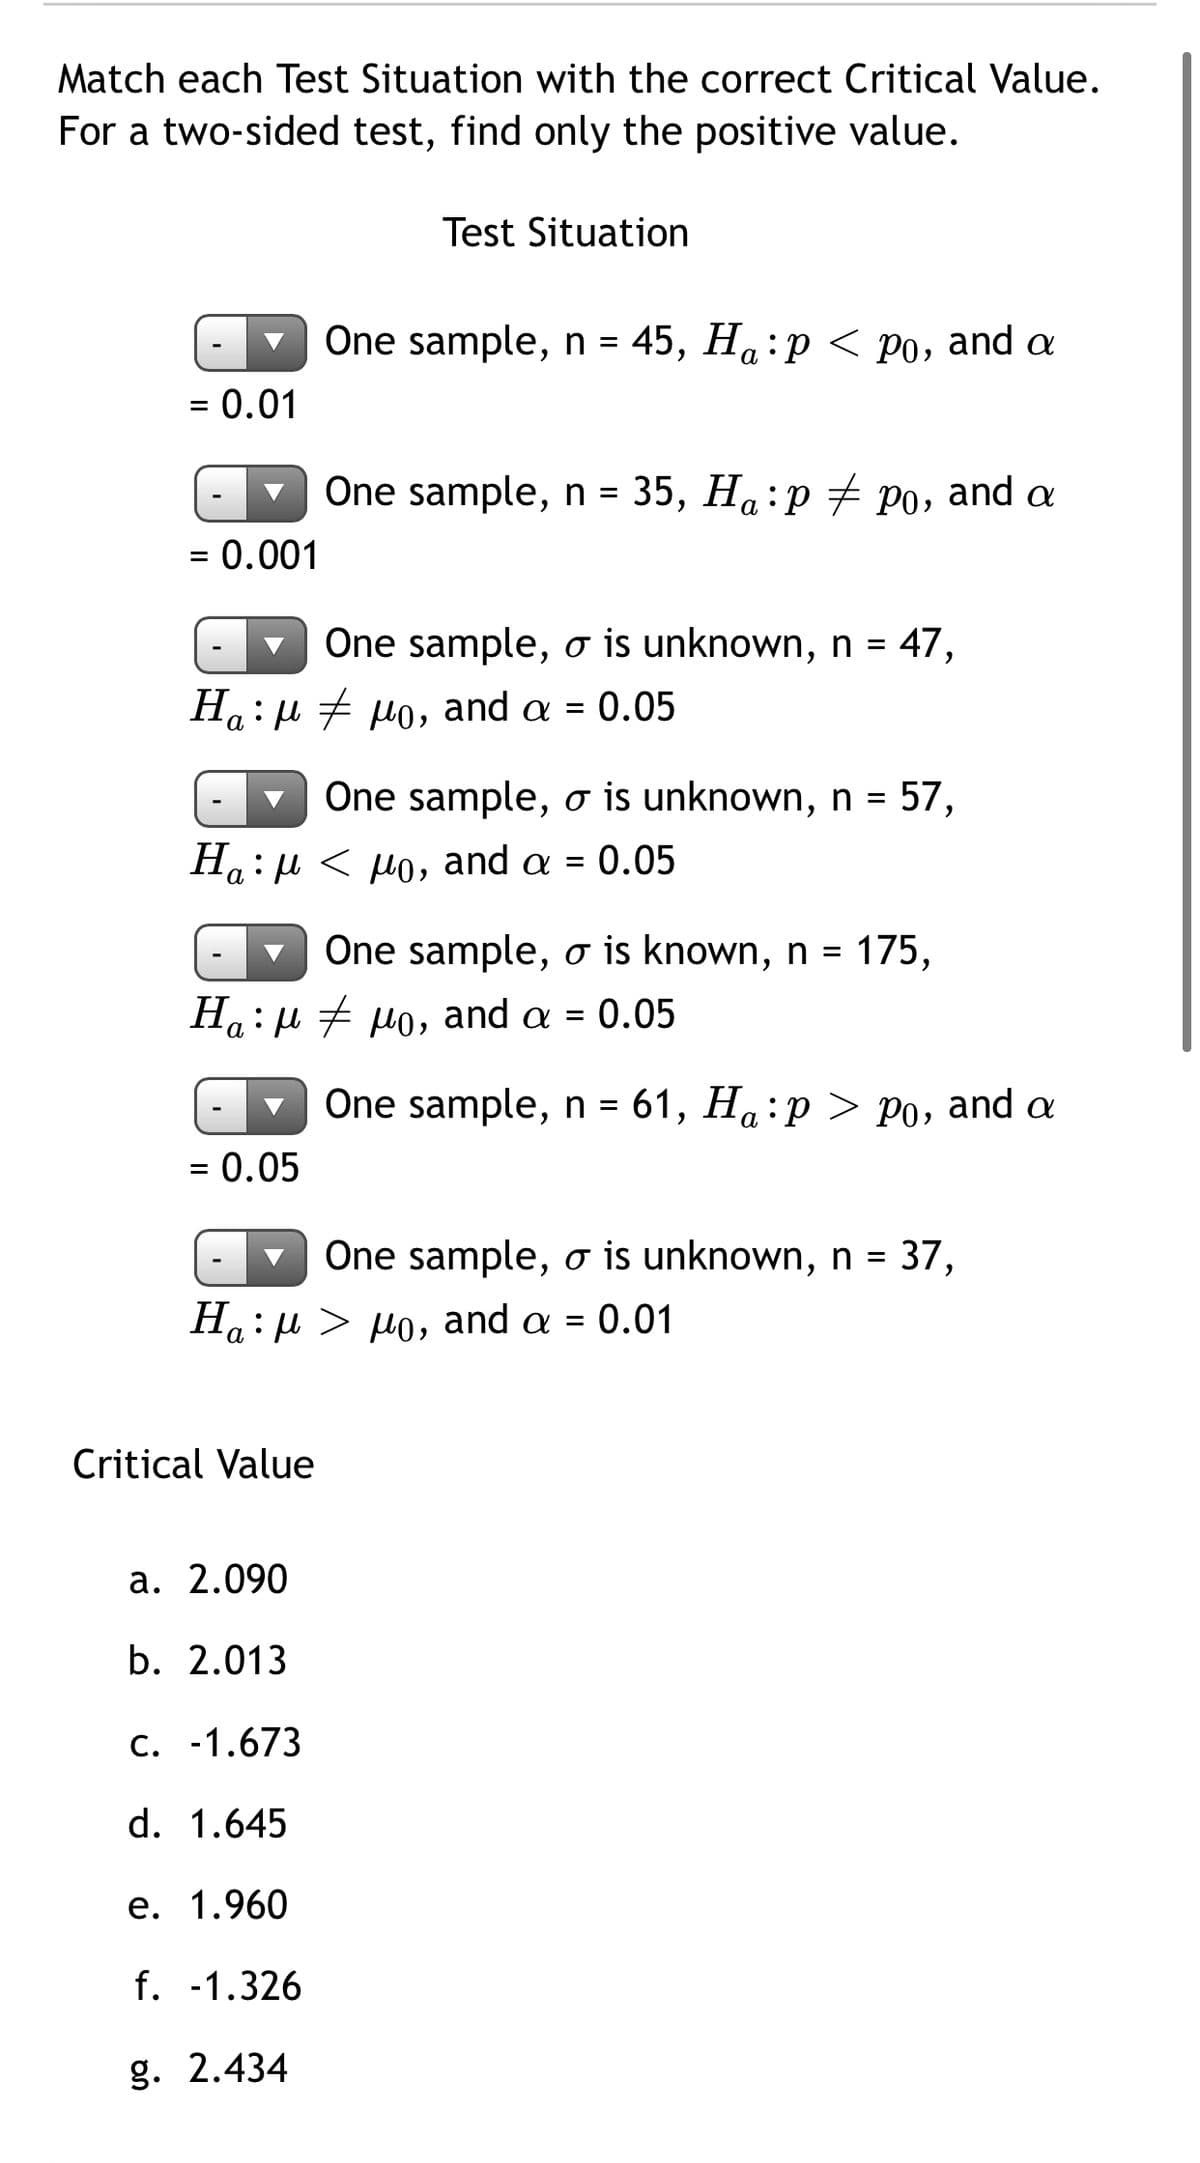 Match each Test Situation with the correct Critical Value.
For a two-sided test, find only the positive value.
Test Situation
One sample, n = 45, H:p < Po, and a
= 0.01
One sample, n = 35, Ha:p + po, and a
%D
= 0.001
One sample, o is unknown, n = 47,
Ha: u + Ho, and a = 0.05
One sample, o is unknown, n = 57,
Ha:µ < po, and a = 0.05
One sample, o is known, n = 175,
Ha:µ + po, and a = 0.05
One sample, n = 61, H:p > Po, and a
= 0.05
One sample, o is unknown, n = 37,
H4: μ>μ 0, and α- 0.01
а
Critical Value
а. 2.090
b. 2.013
C. -1.673
d. 1.645
е. 1.960
f. -1.326
g. 2.434
